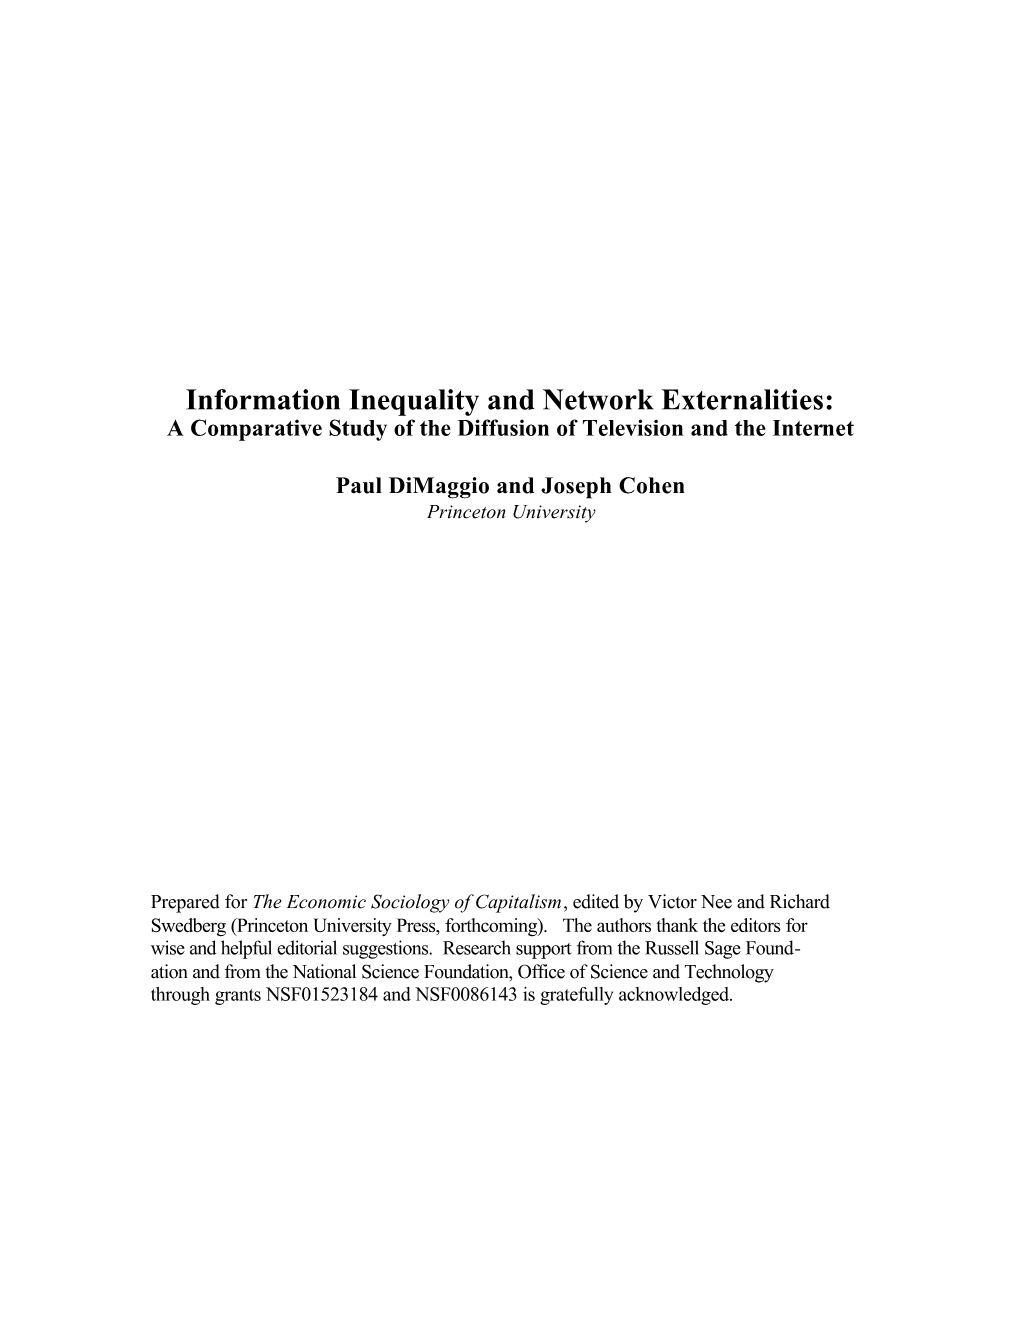 Information Inequality and Network Externalities: a Comparative Study of the Diffusion of Television and the Internet